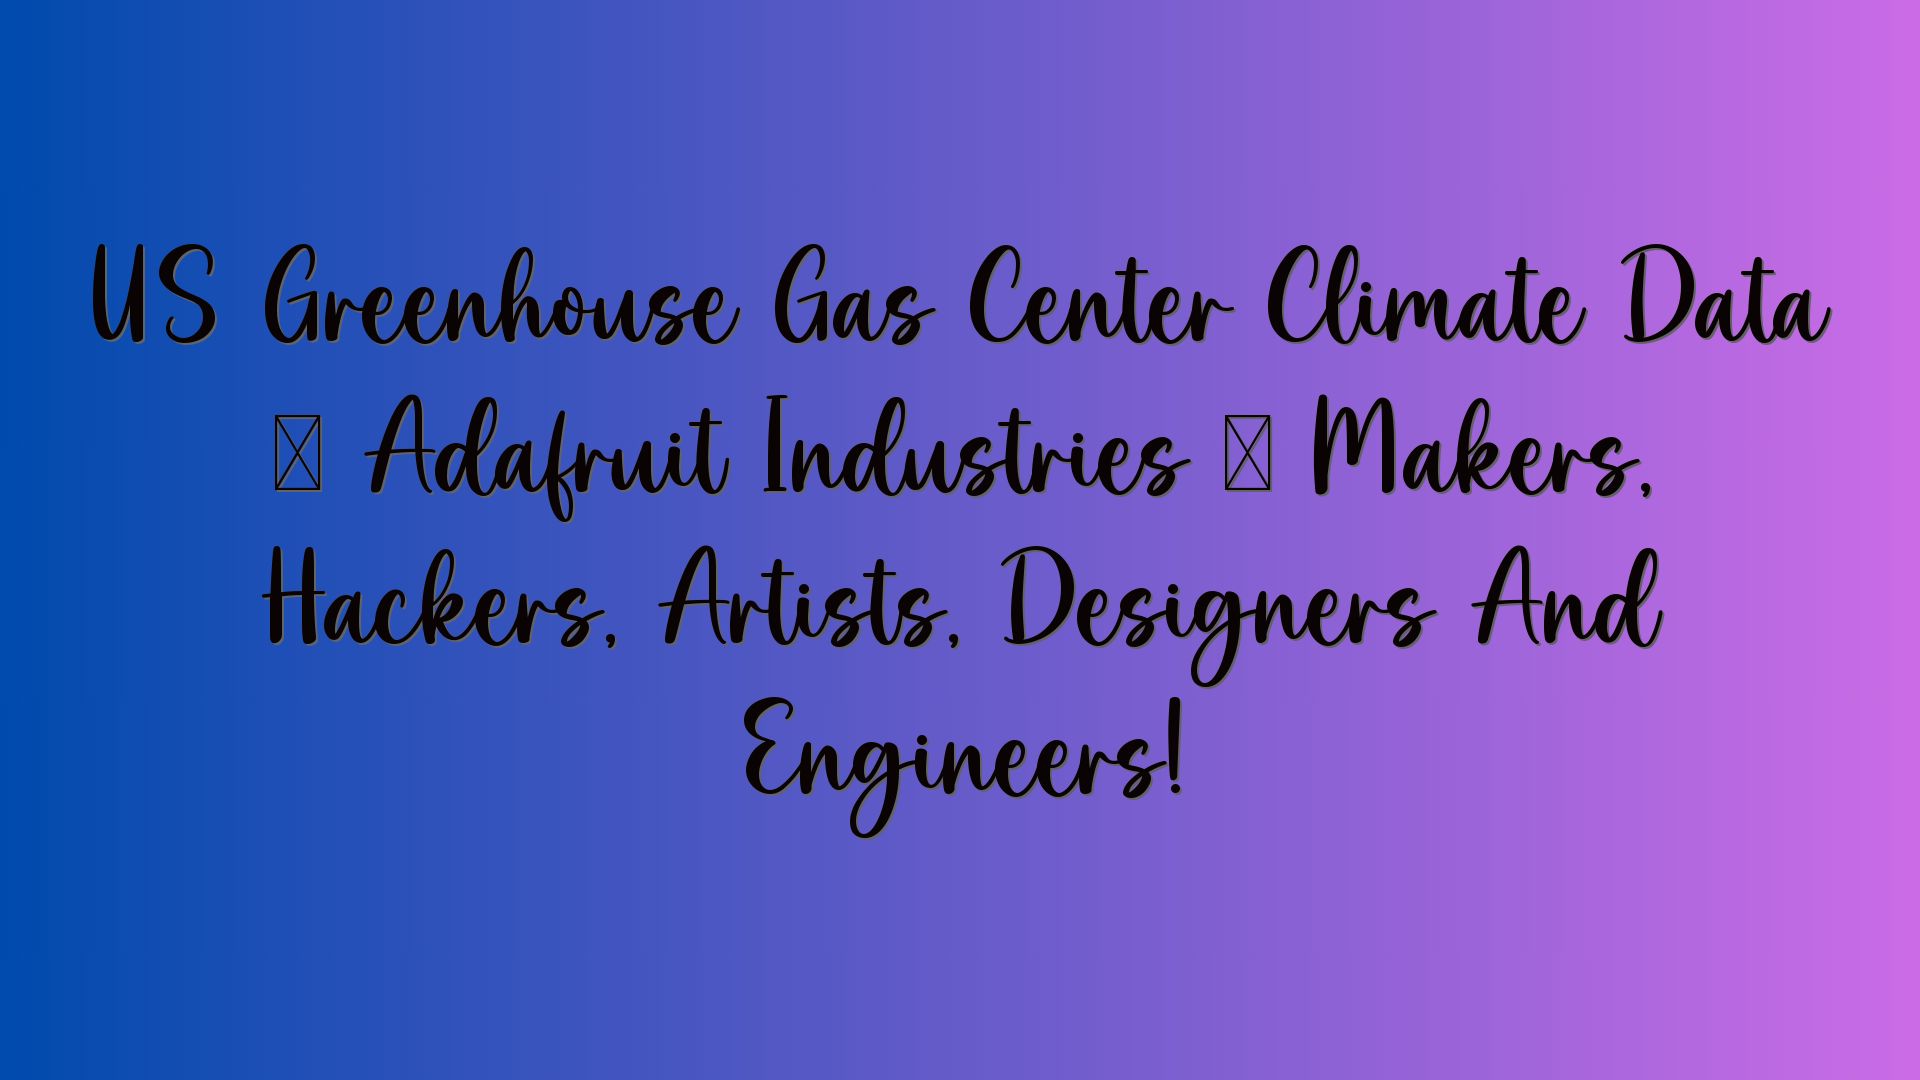 US Greenhouse Gas Center Climate Data « Adafruit Industries – Makers, Hackers, Artists, Designers And Engineers!